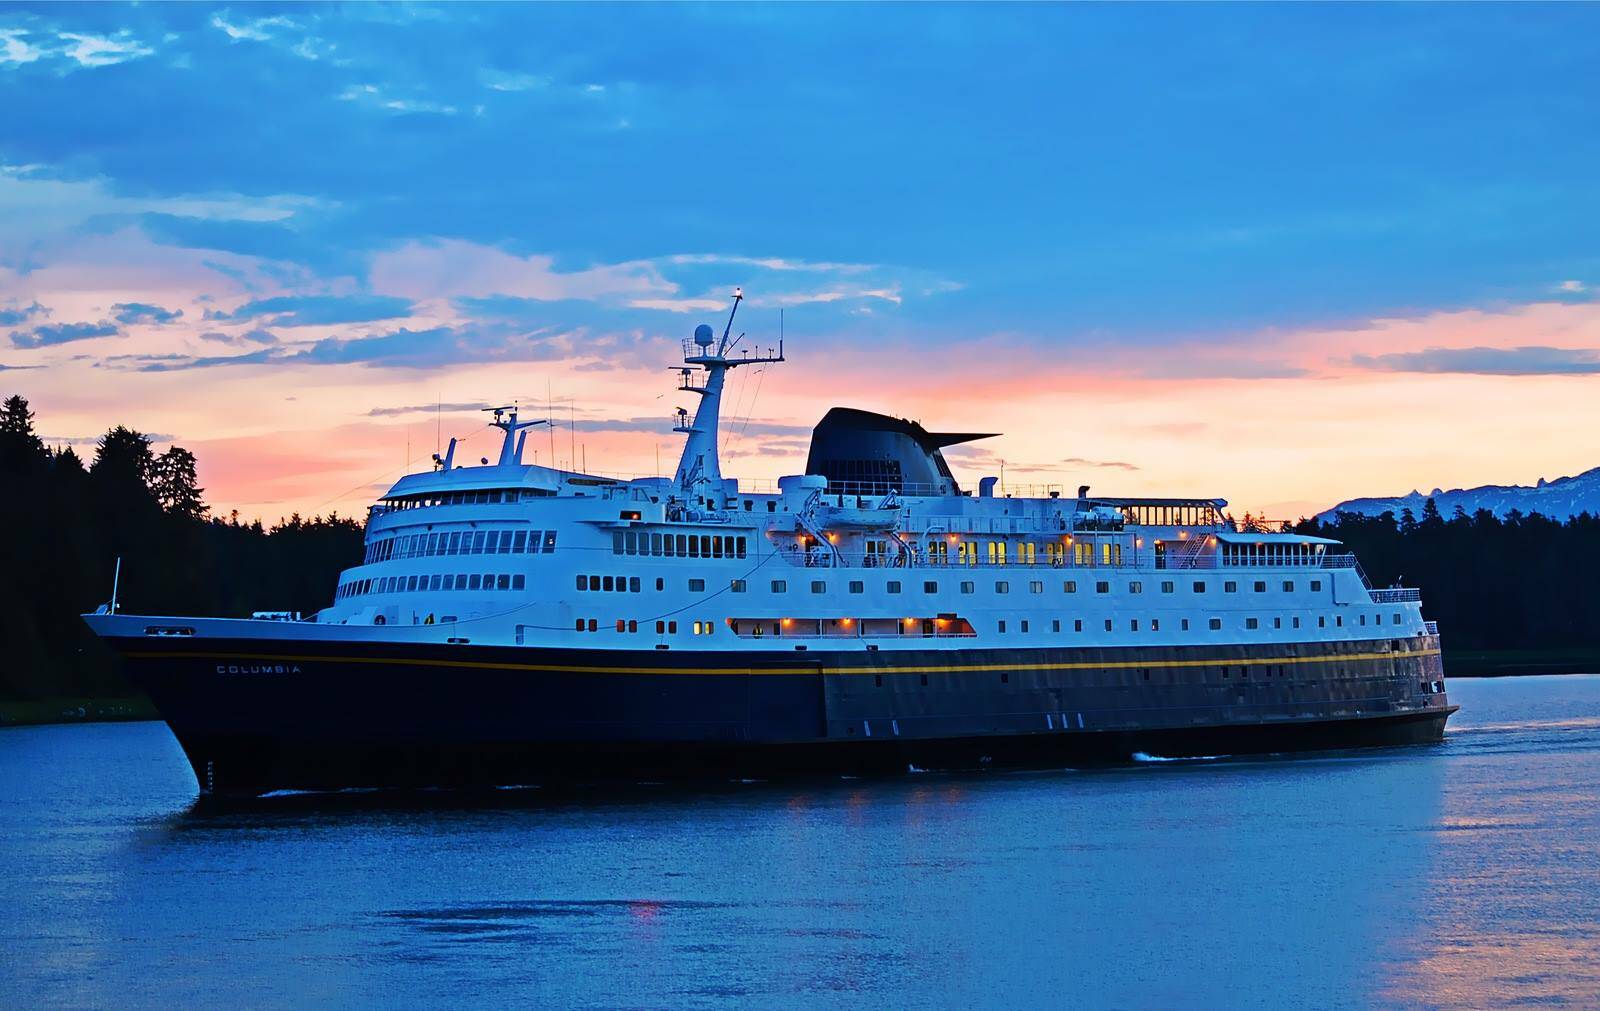 The Columbia ferry, which was grounded in 2019 to save costs, is scheduled to return to Juneau next weekend as it resumes service between Alaska and Bellingham, Washington, due to a more-extensive-than-expected overhaul of the Matanuska. The ferry system is by far the biggest recipient to date of funds from the 2021 federal infrastructure bill in terms of Southeast Alaska impacts. (Carey Case / Alaska Marine Highway)